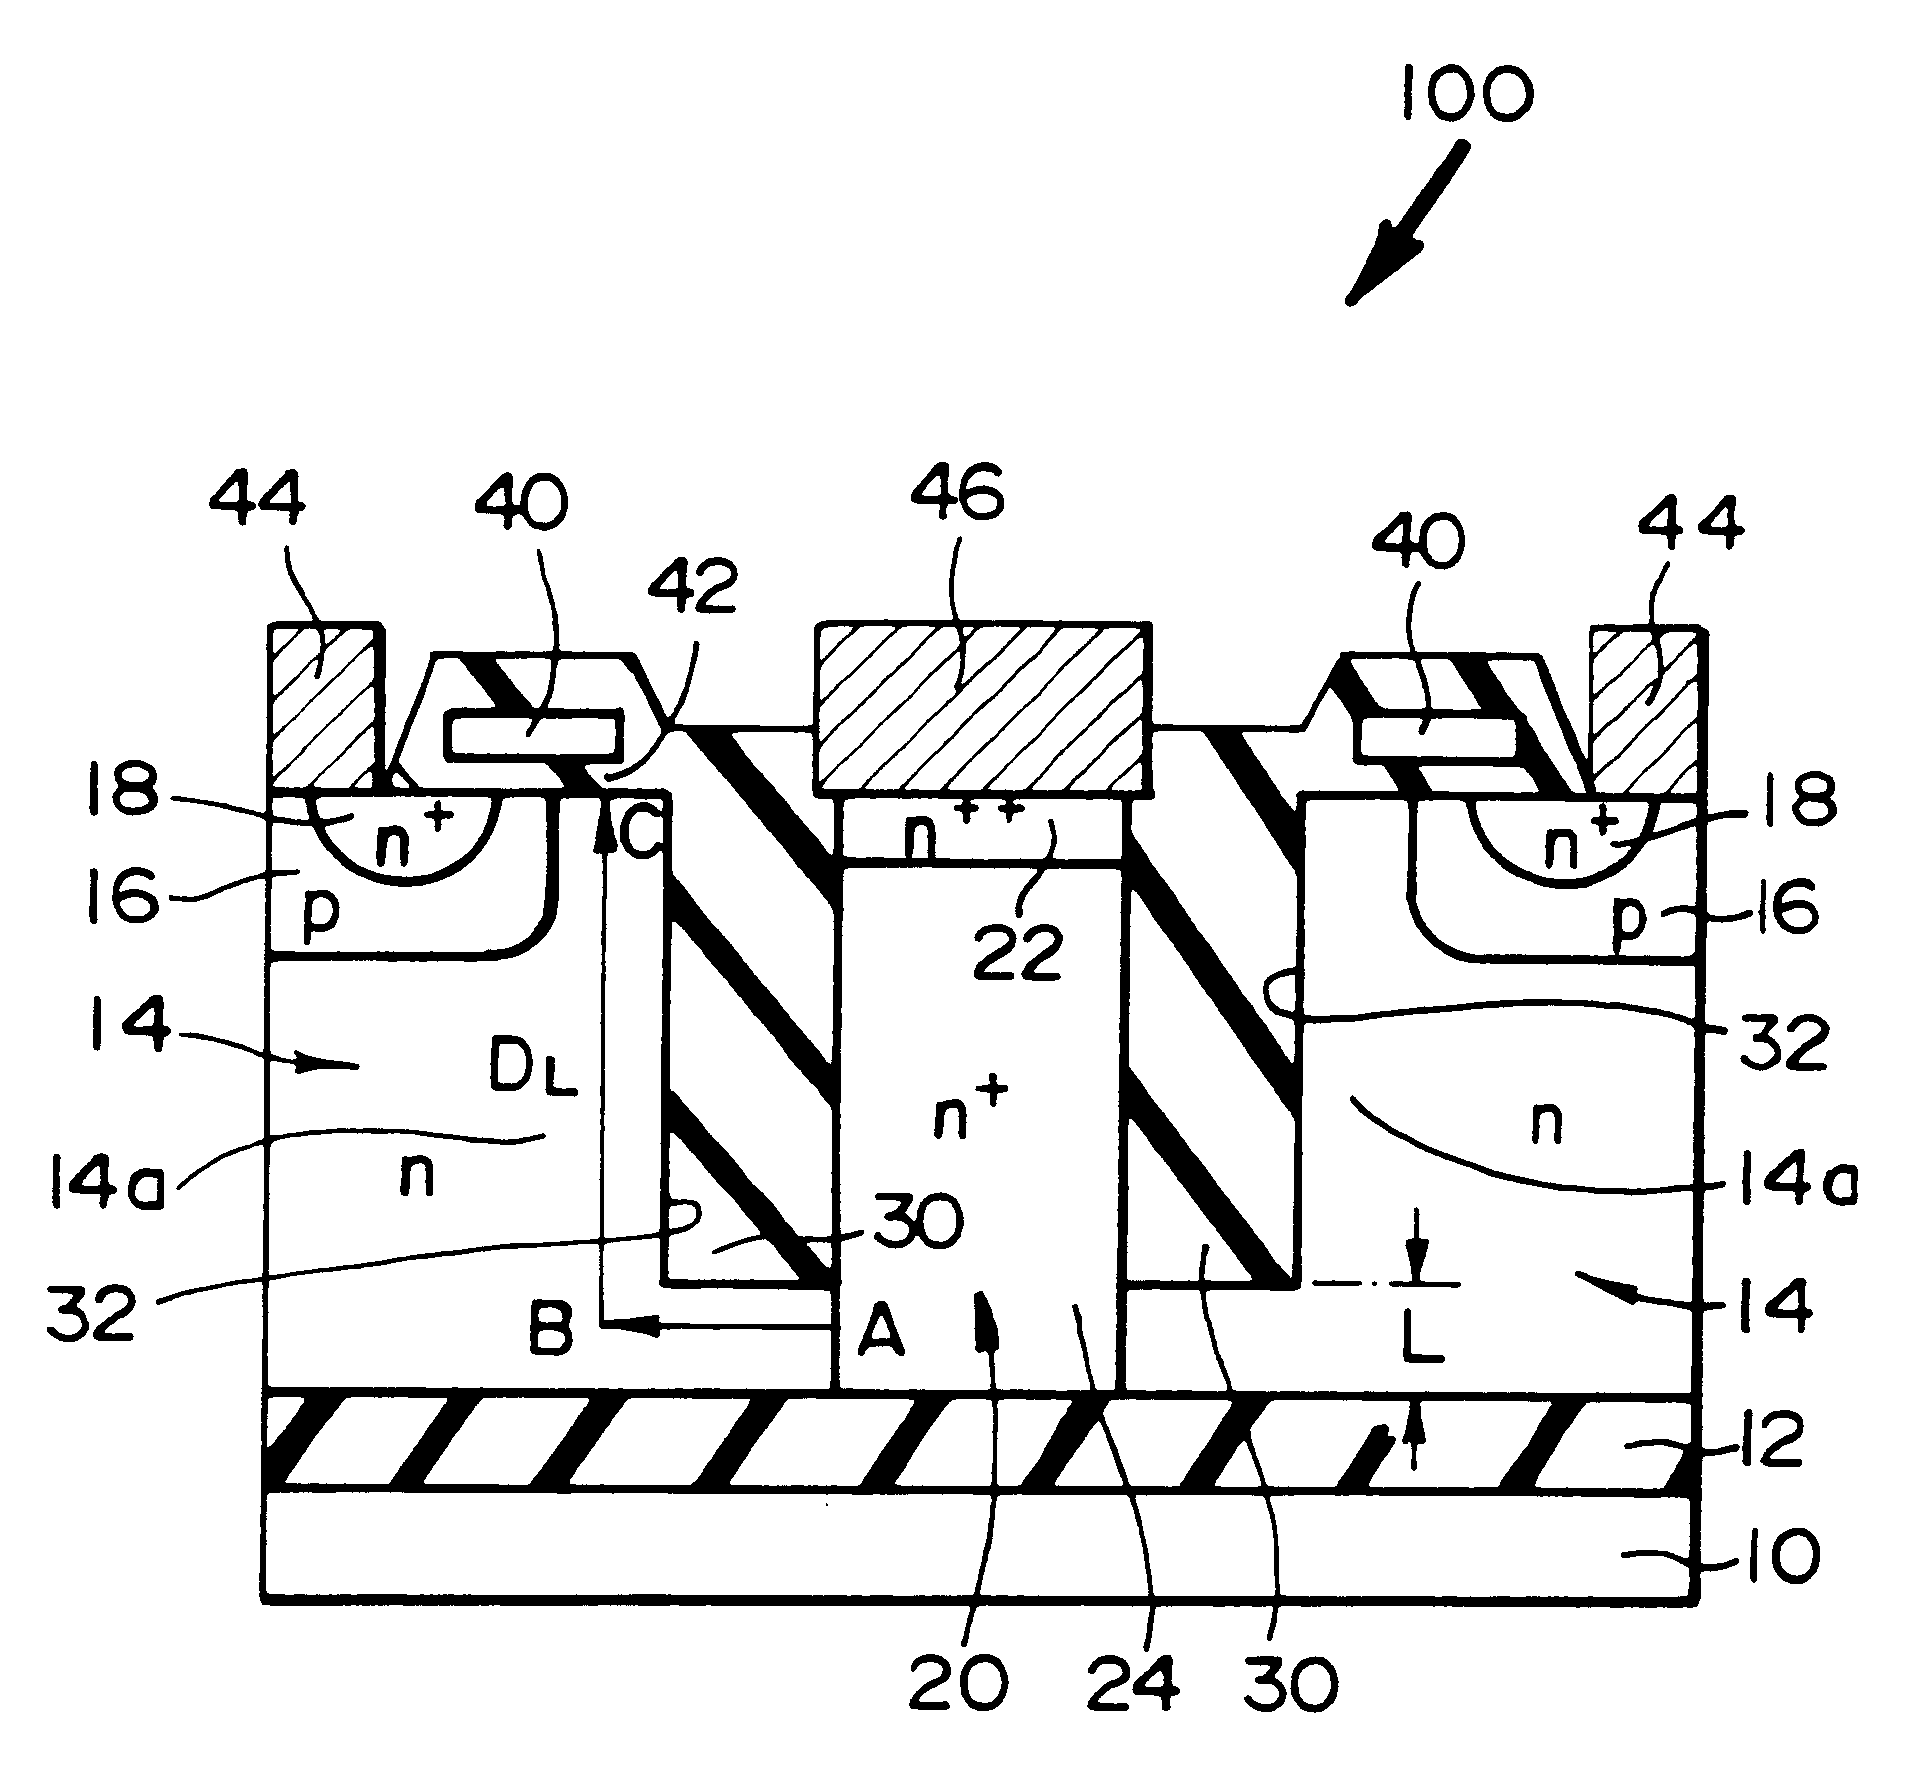 Semiconductor device with a high breakdown voltage,low on-resistance,lateral power mosfet